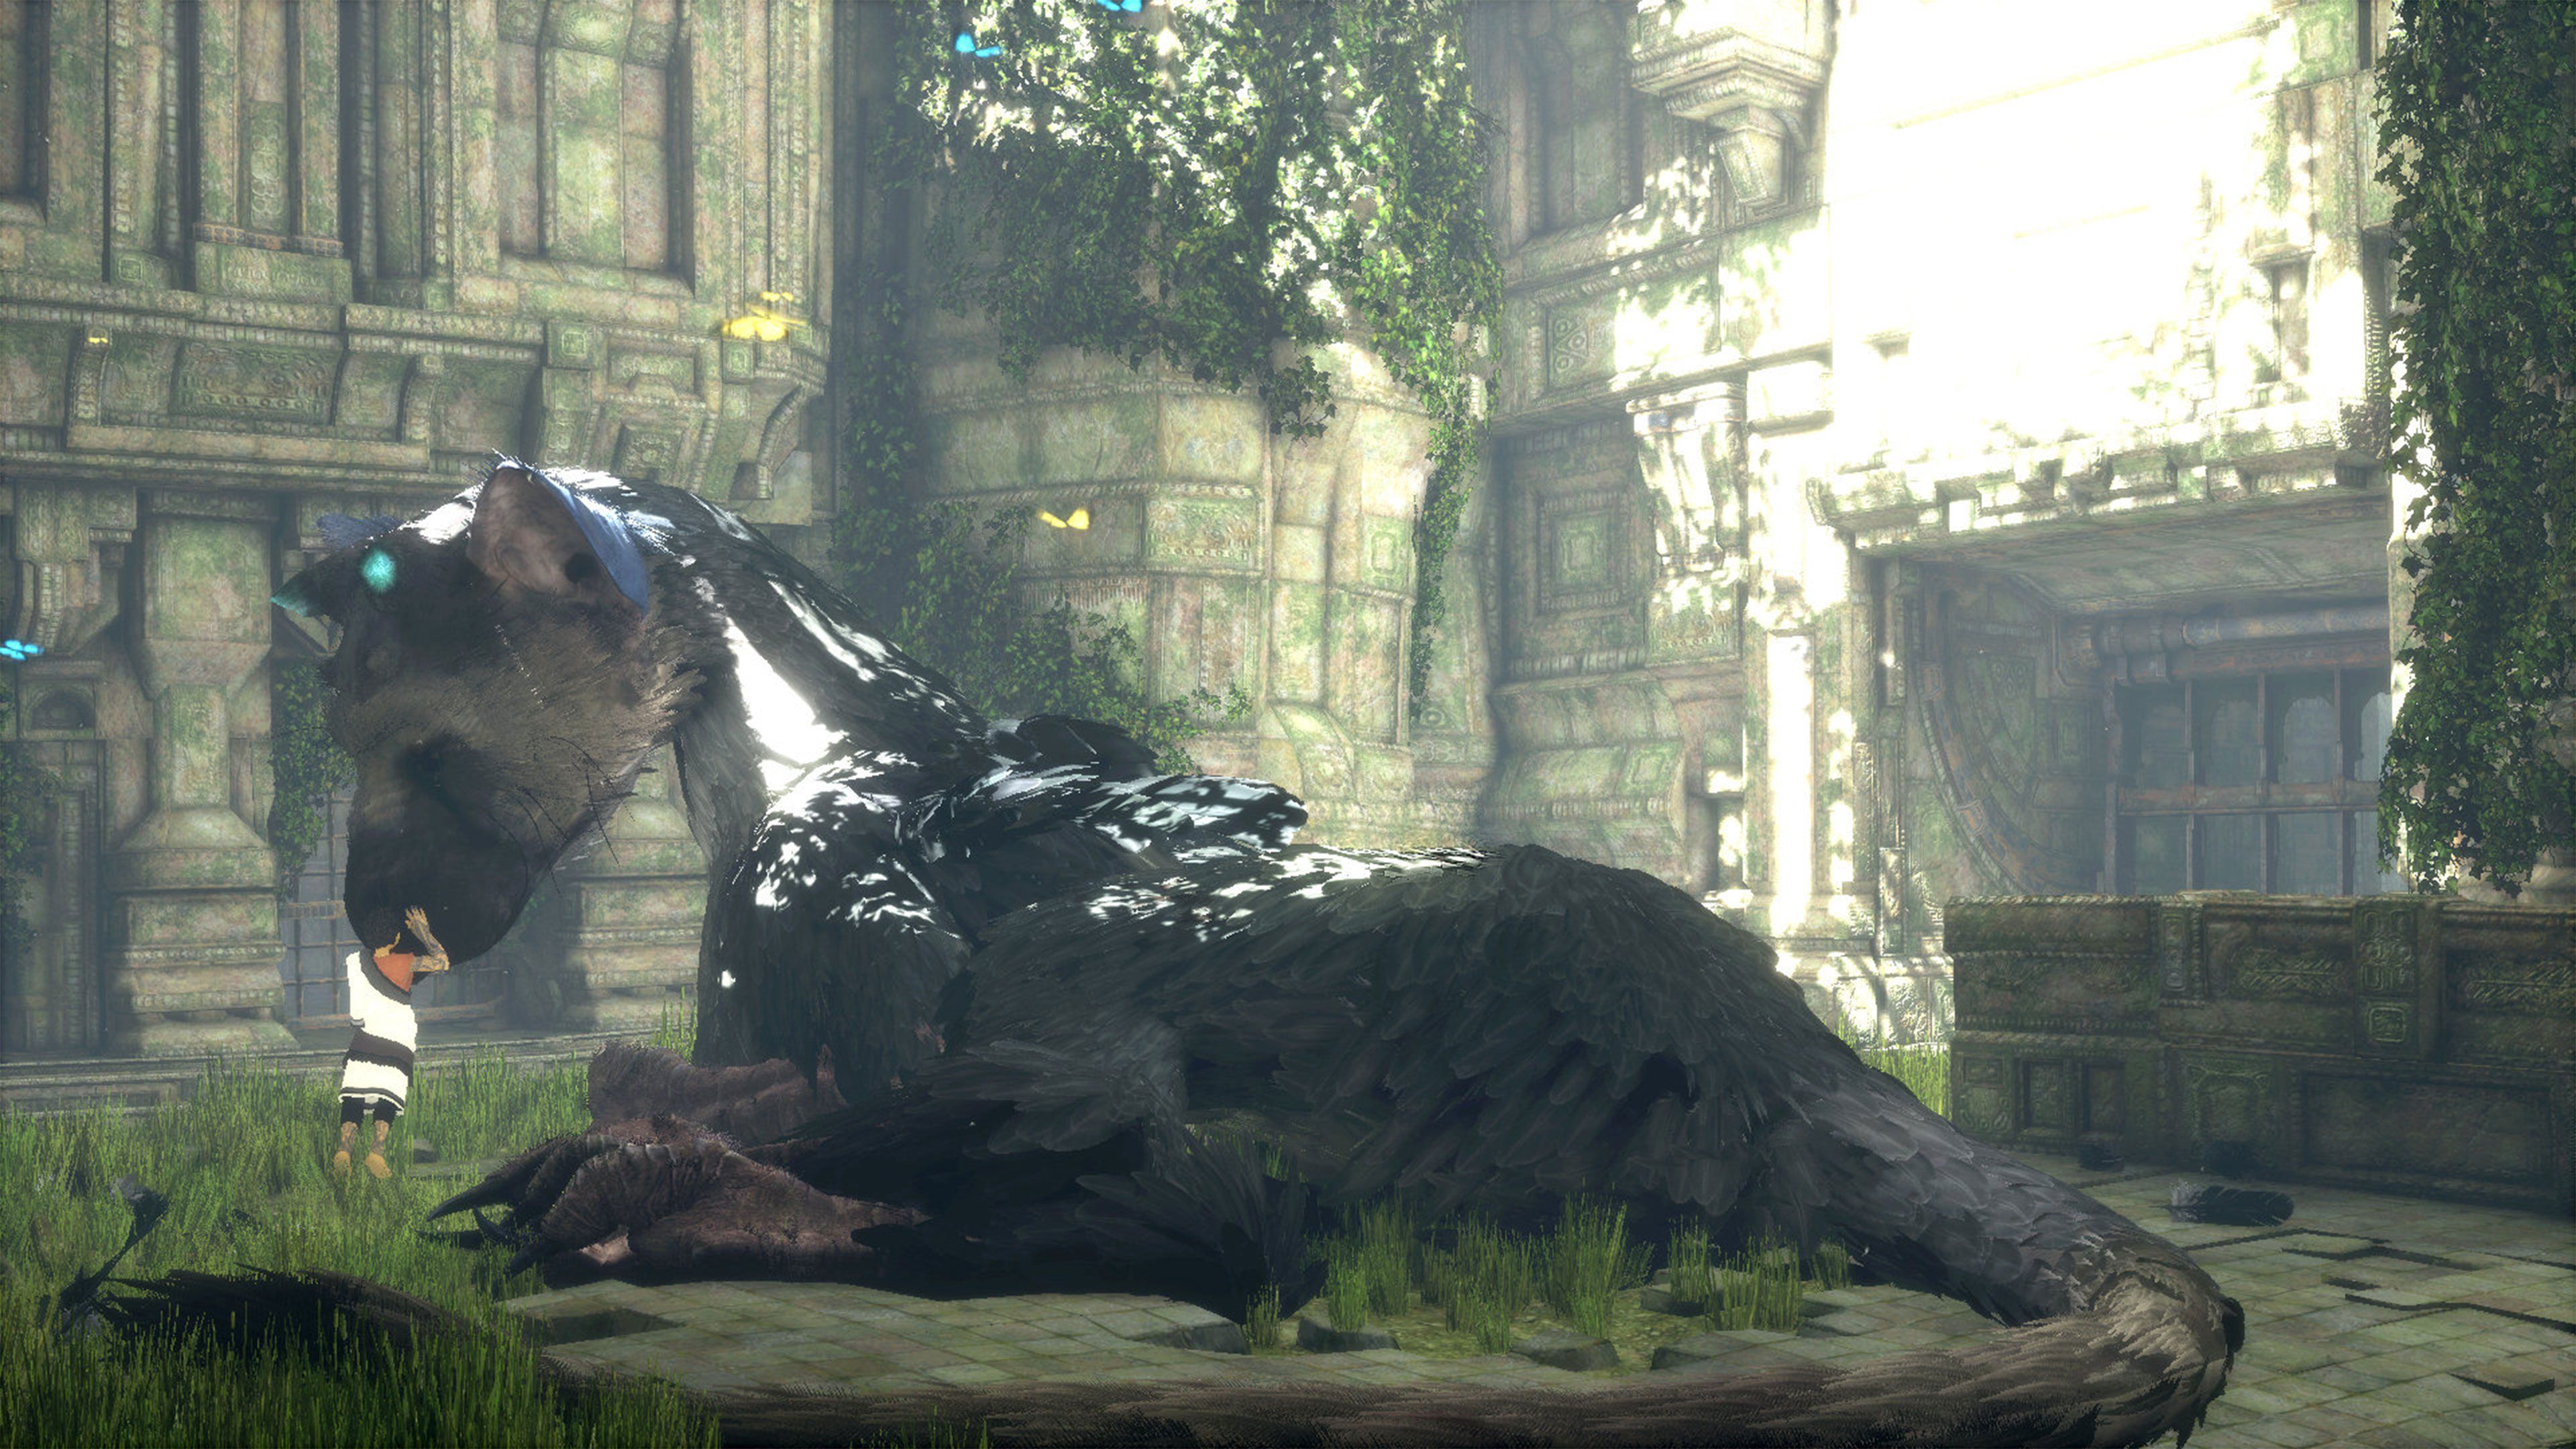 The last guardian - Fantasy & Abstract Background Wallpapers on Desktop  Nexus (Image 2711629)